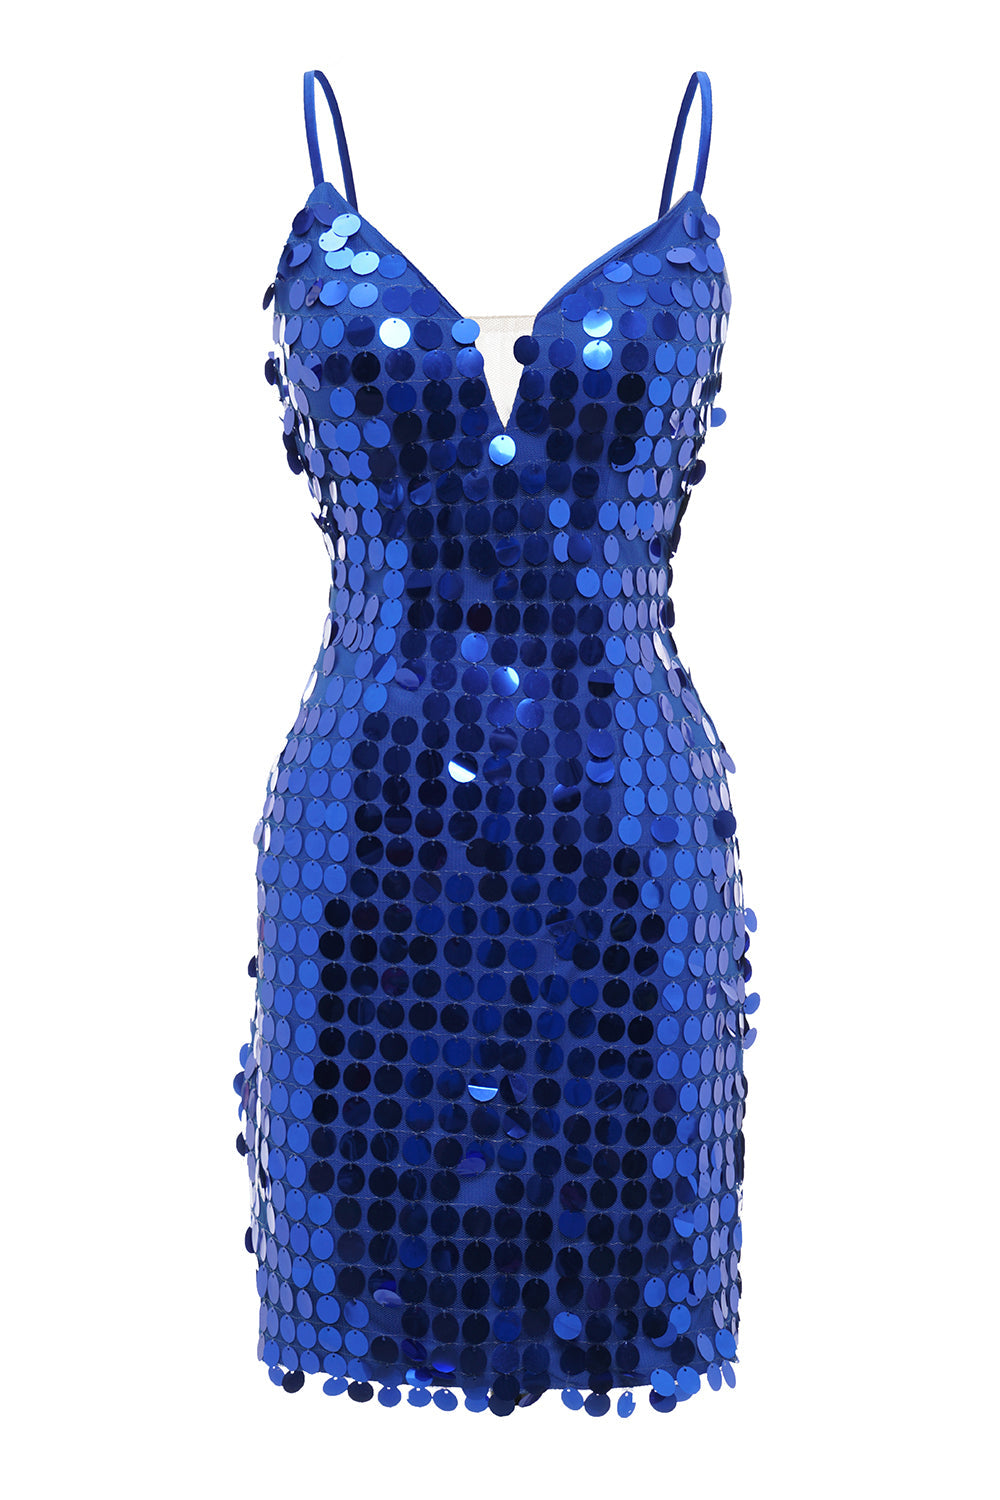 Homecoming Dresses Sparkle, Royal Blue Sparkly Sequins Tight Short Homecoming Dress